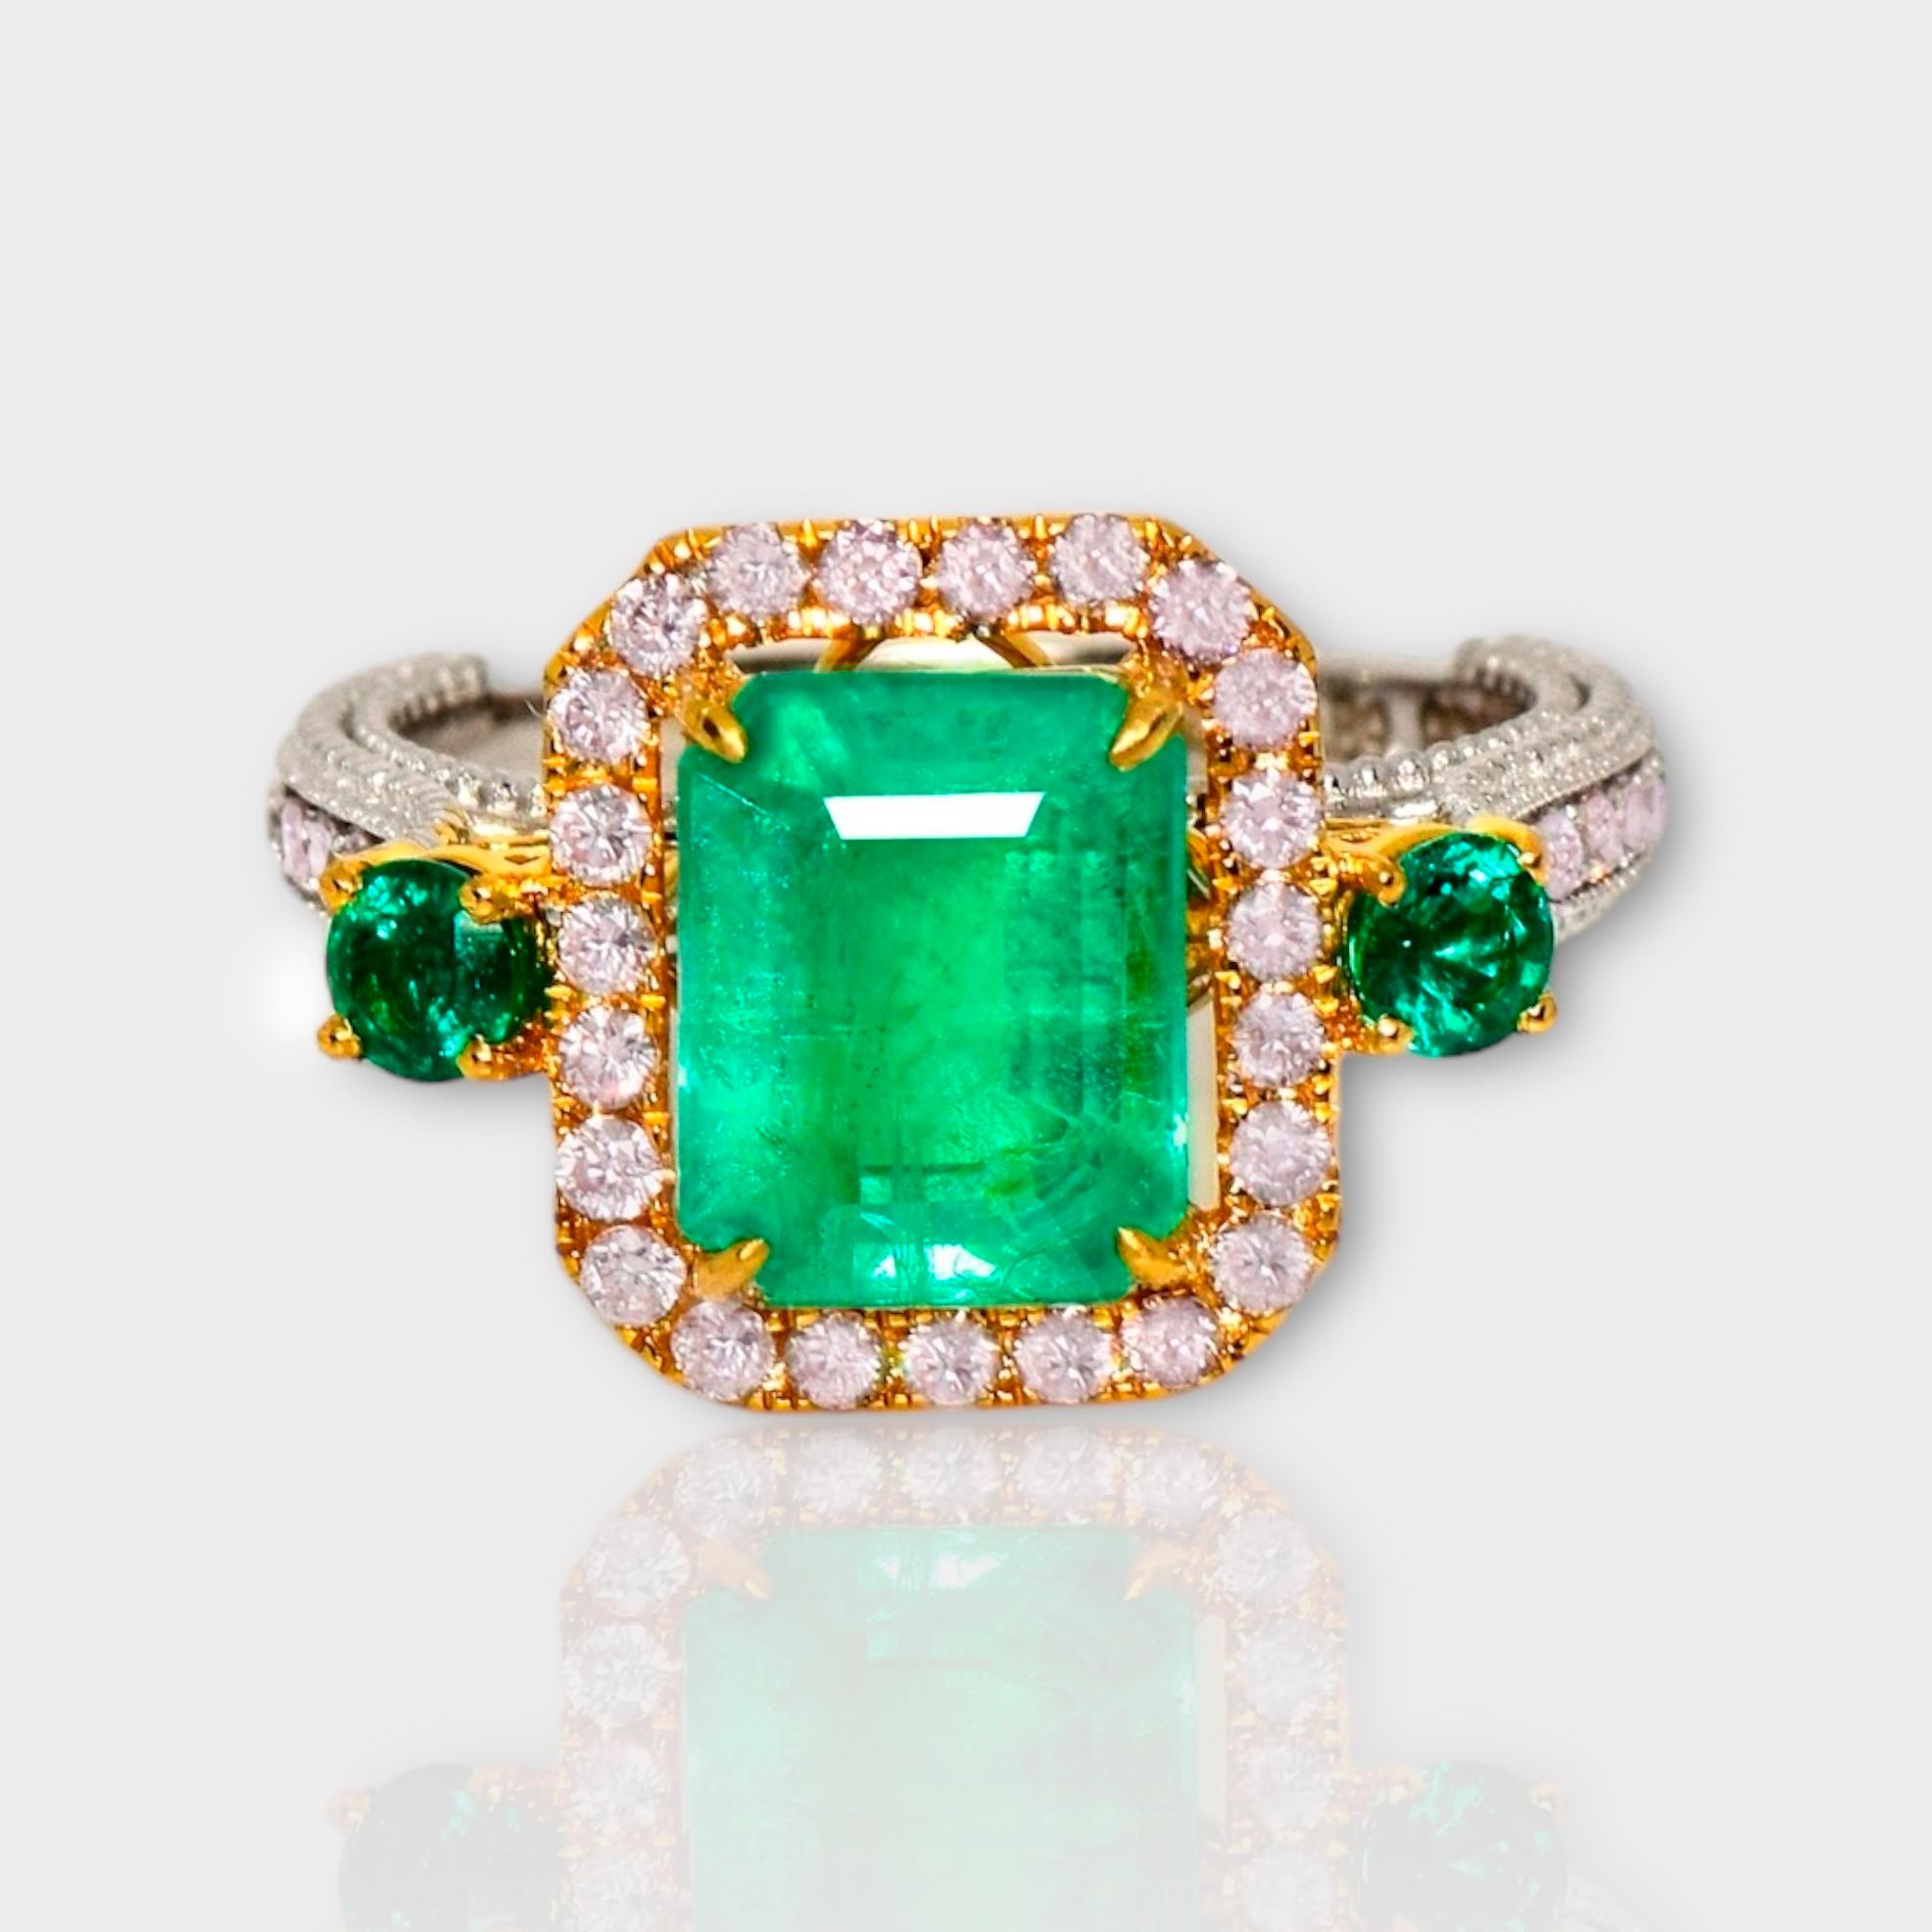 **IGI 18K Dual-color Gold 2.60 ct Emerald&Pink Diamonds Antique Art Deco Style Engagement Ring** 

An IGI-certified natural Zambia green emerald weighing 2.60 ct is set on an 18K dual-color gold arc deco design band with natural pink diamonds